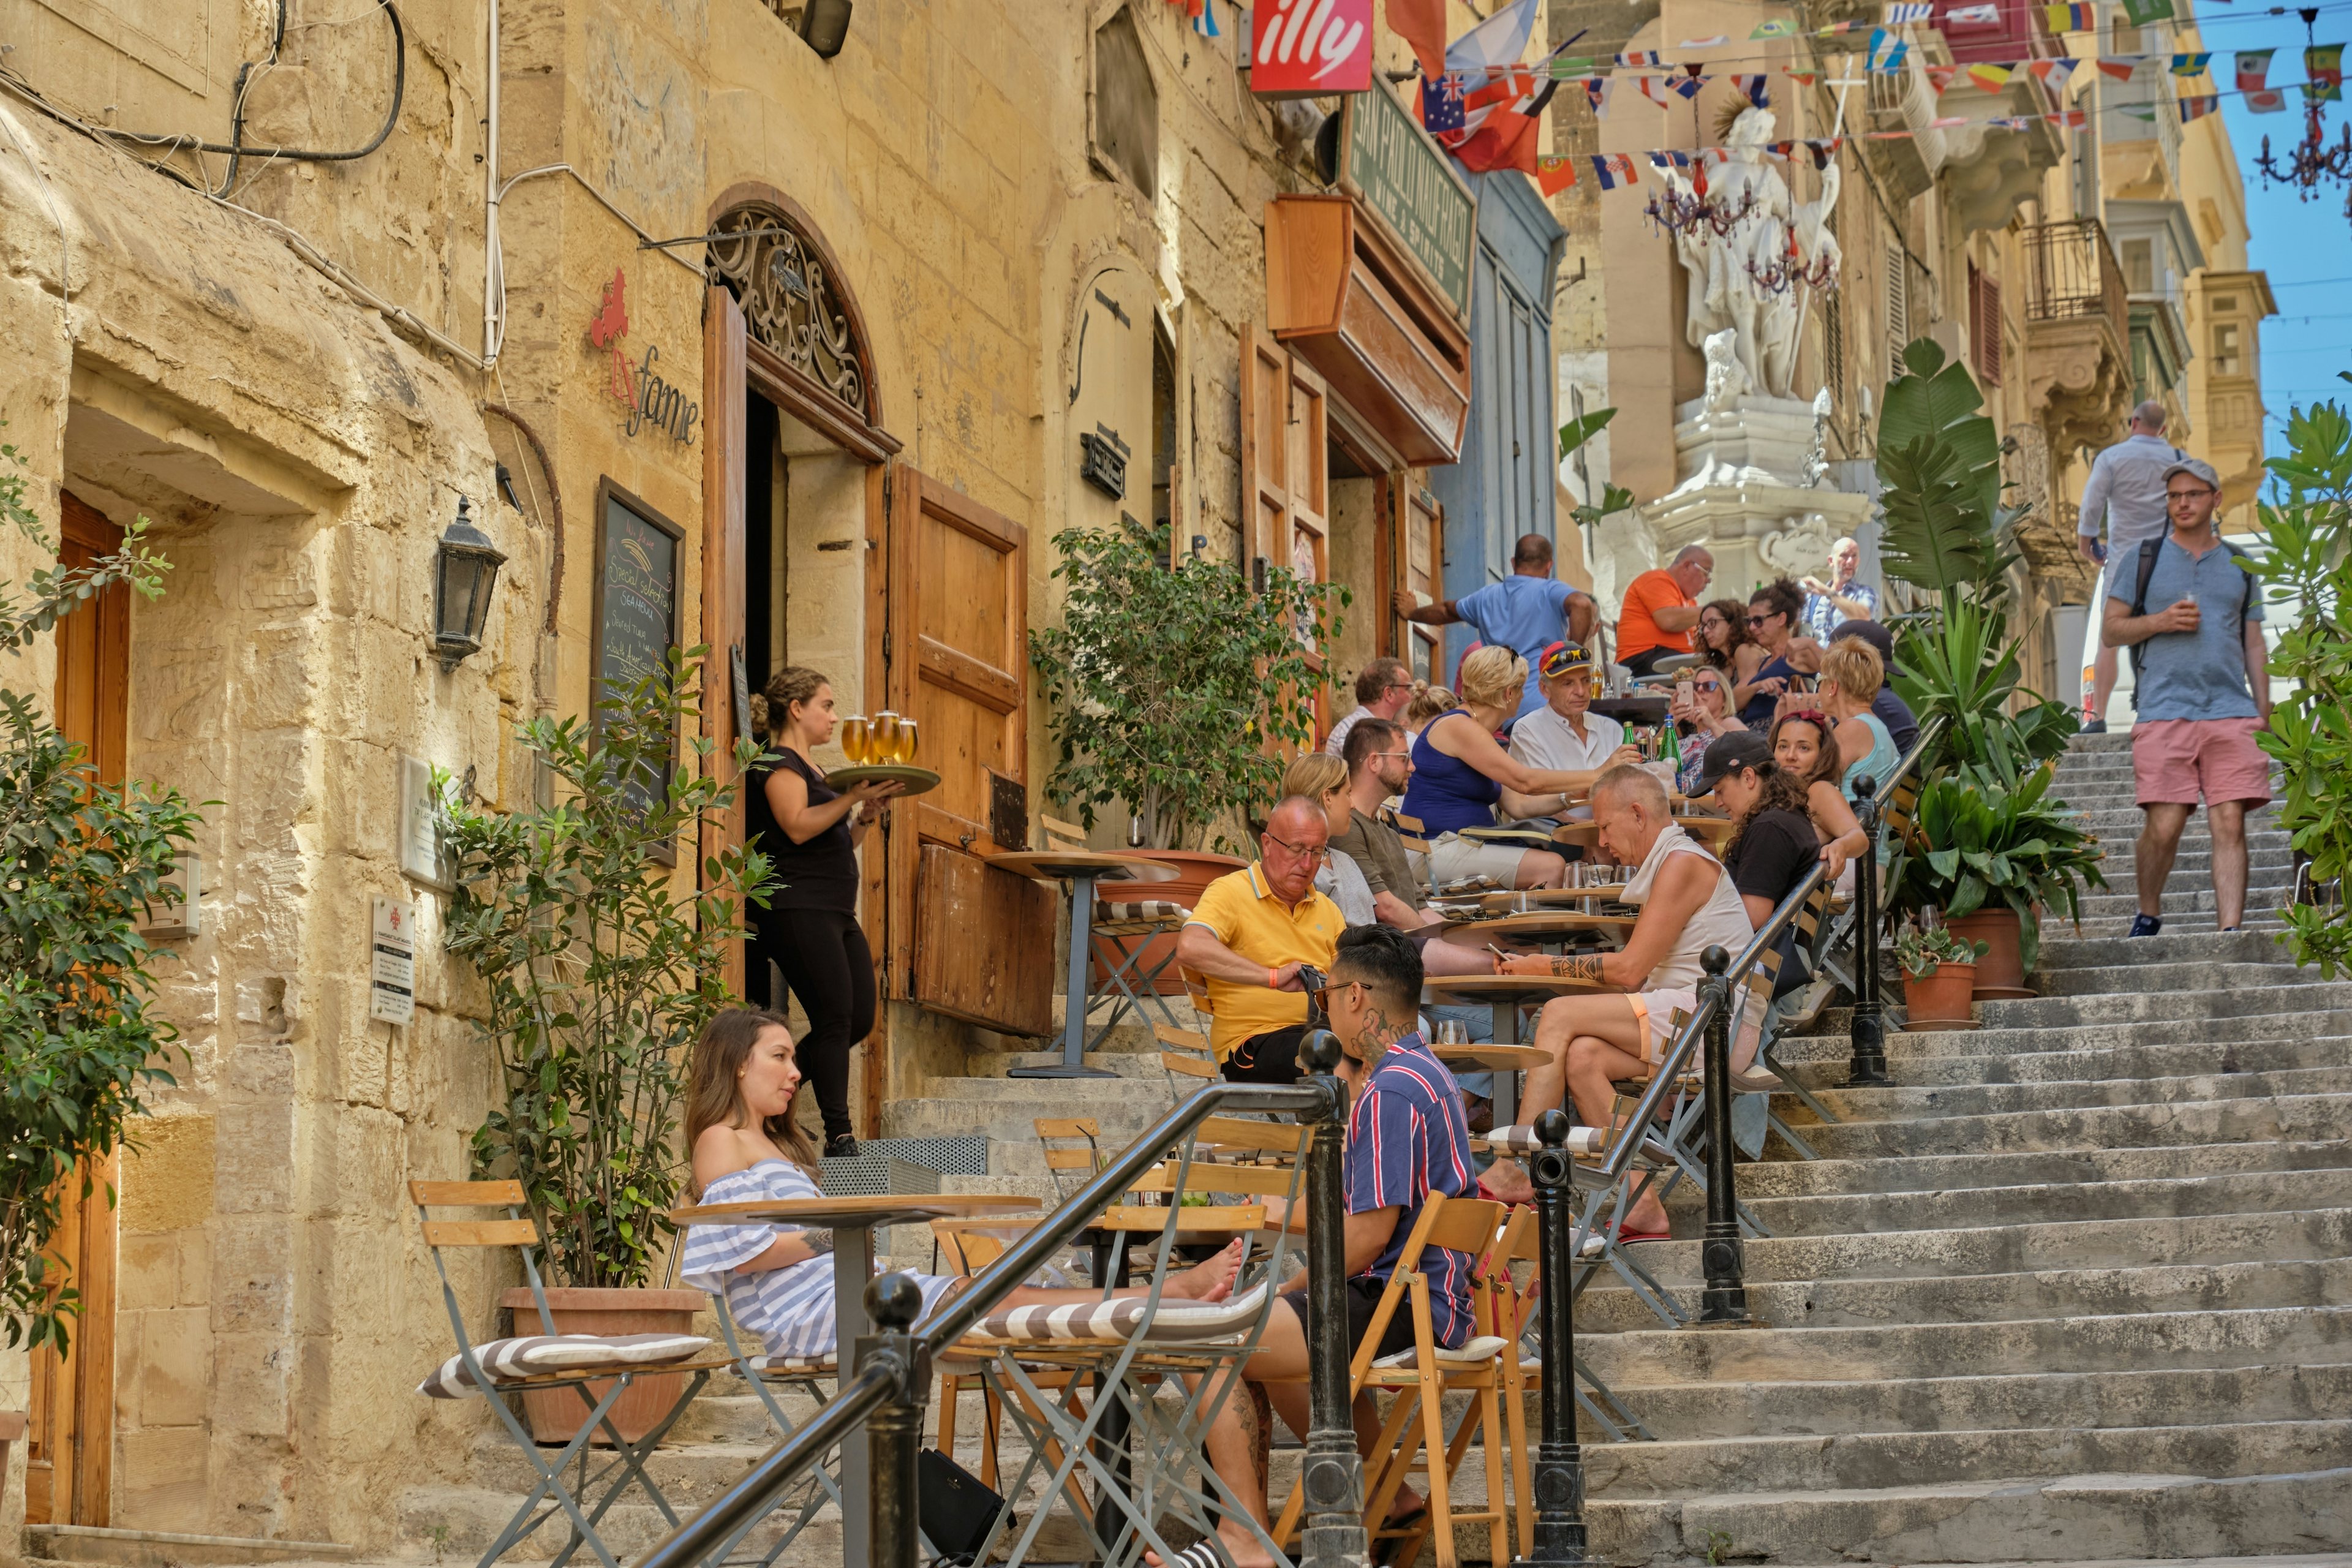 Malta is popular among Chinese investors due to its EU membership, prevalence of English, and British education system. Photo: Shutterstock